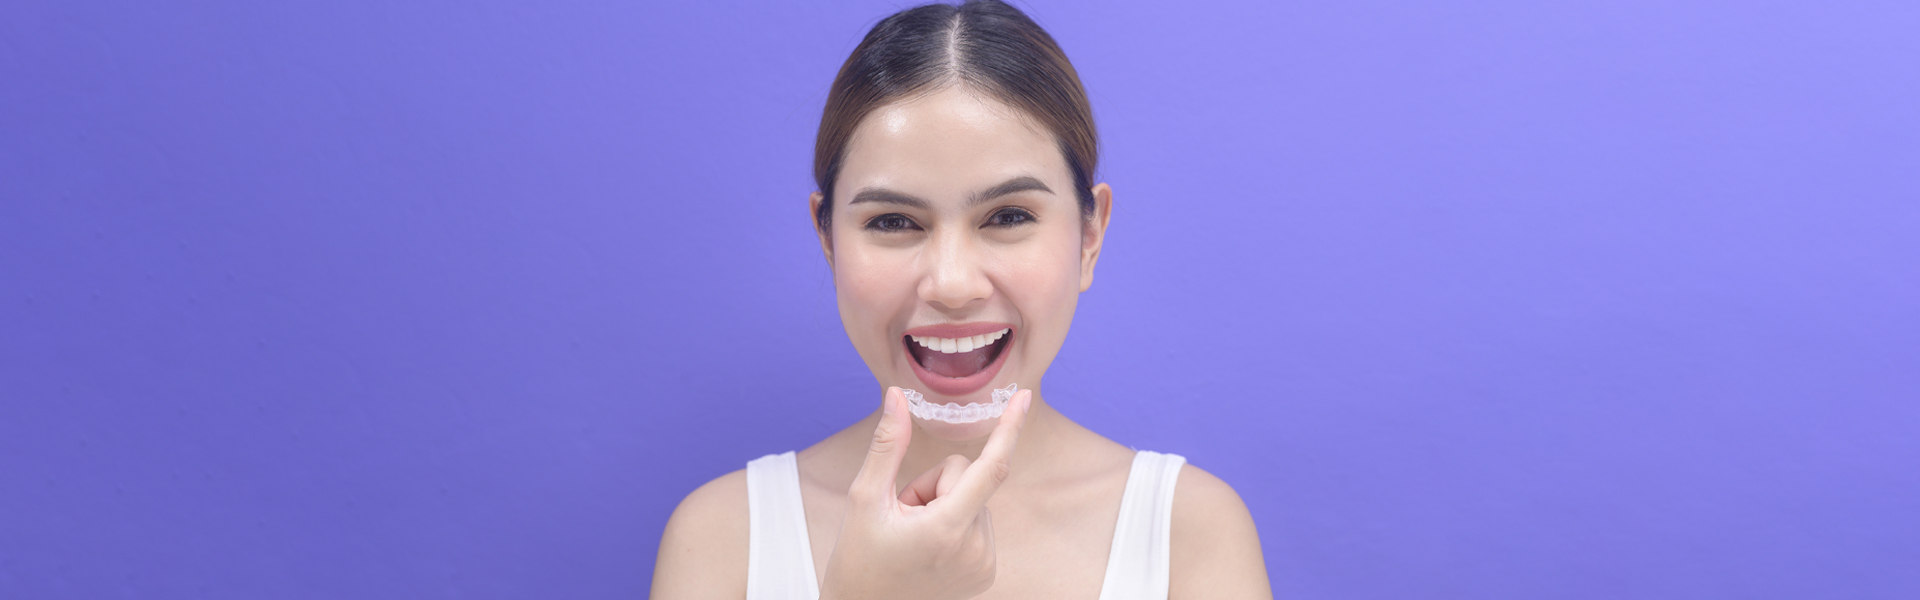 The Effectiveness Of Invisalign Clear Aligners For Orthodontic Treatment